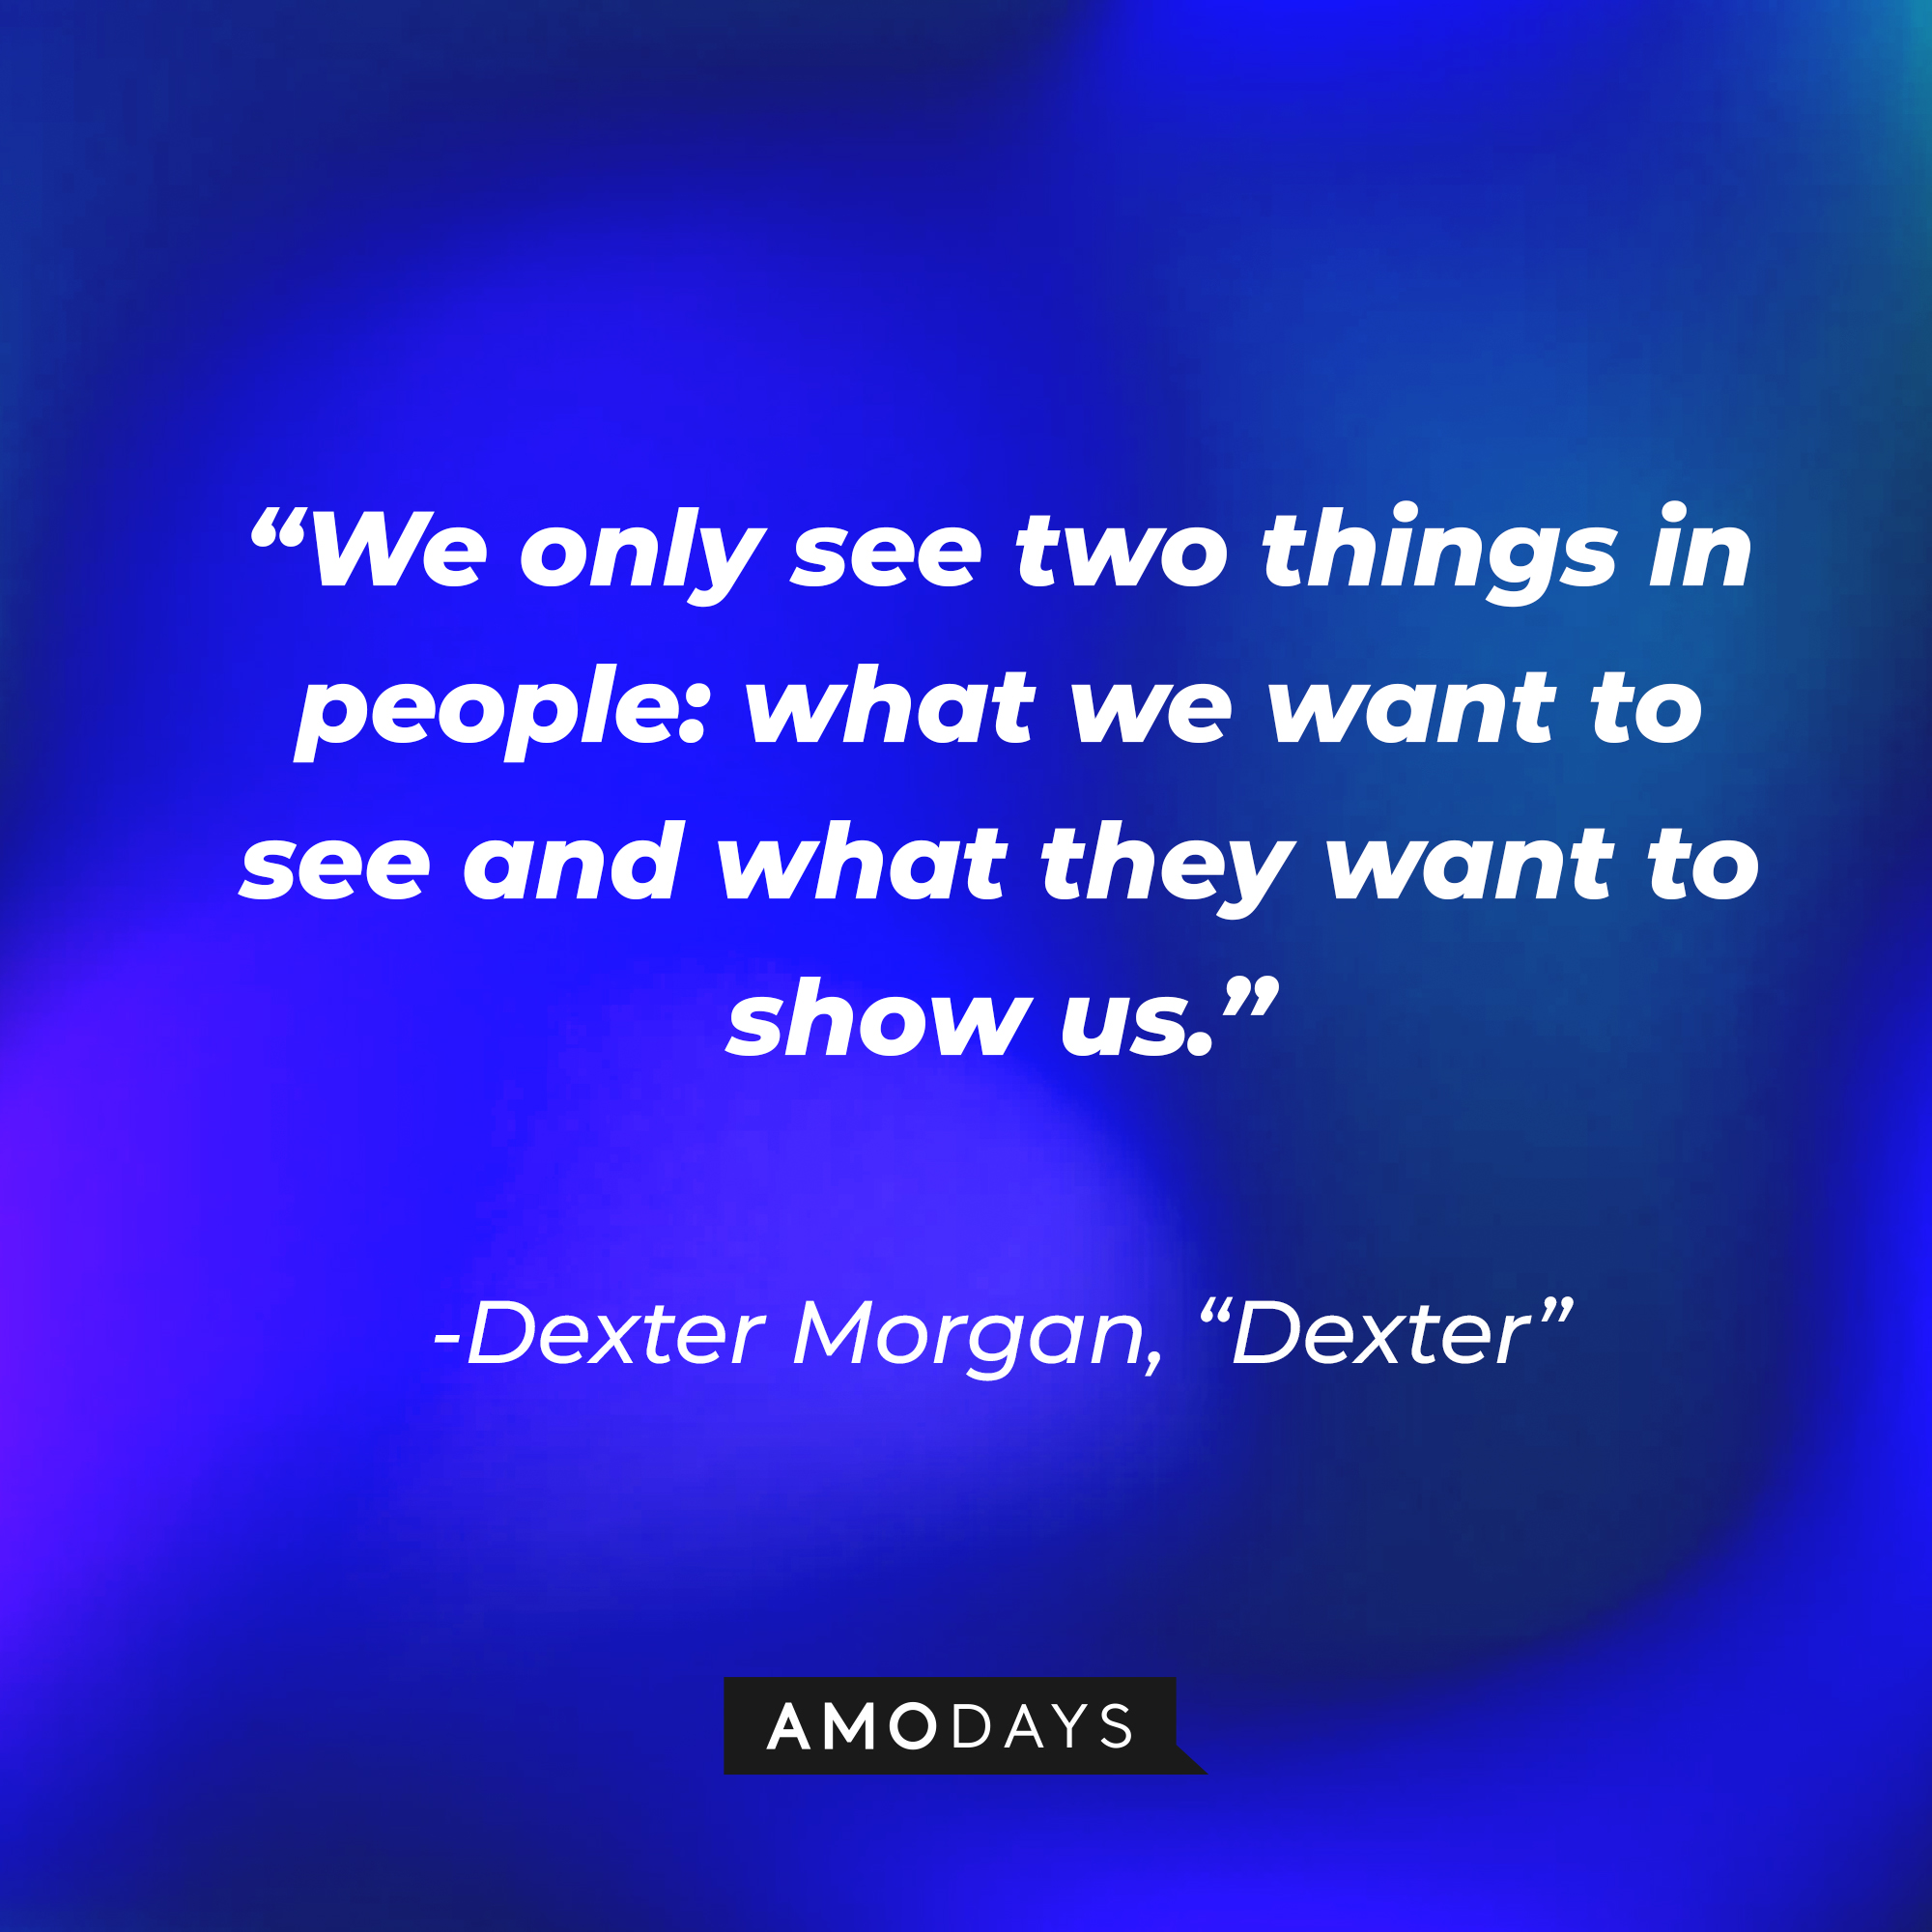 Dexter Morgan's quote from "Dexter:" "We only see two things in people: what we want to see and what they want to show us.” | Source: AmoDays